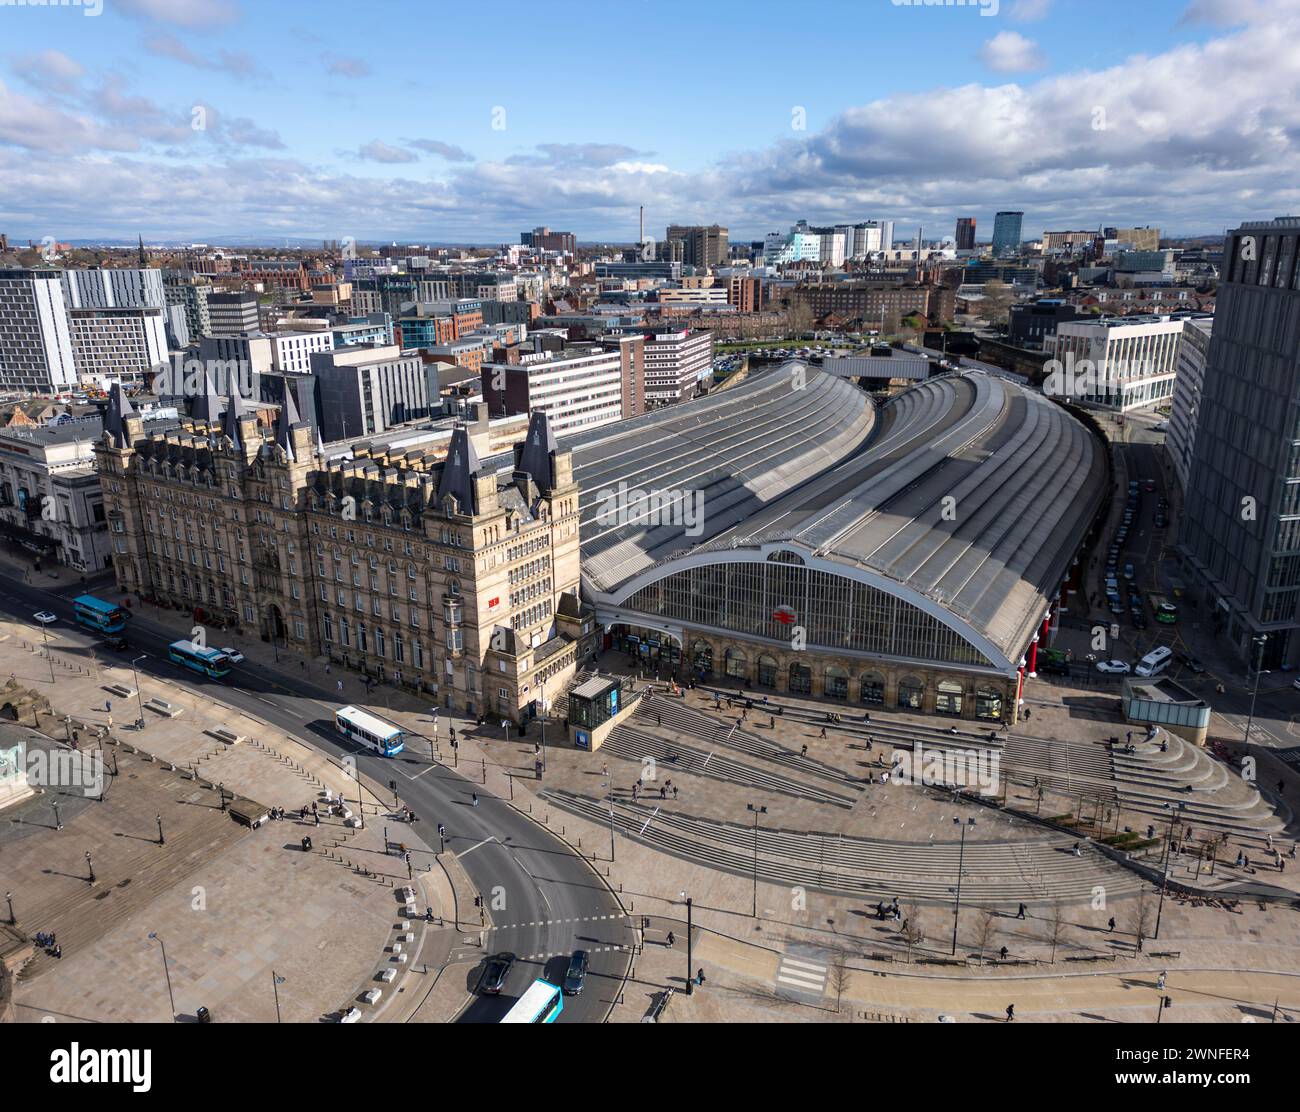 Aerial view of Liverpool Lime Street Station and Radisson RED Liverpool Hotel, Merseyside, England Stock Photo